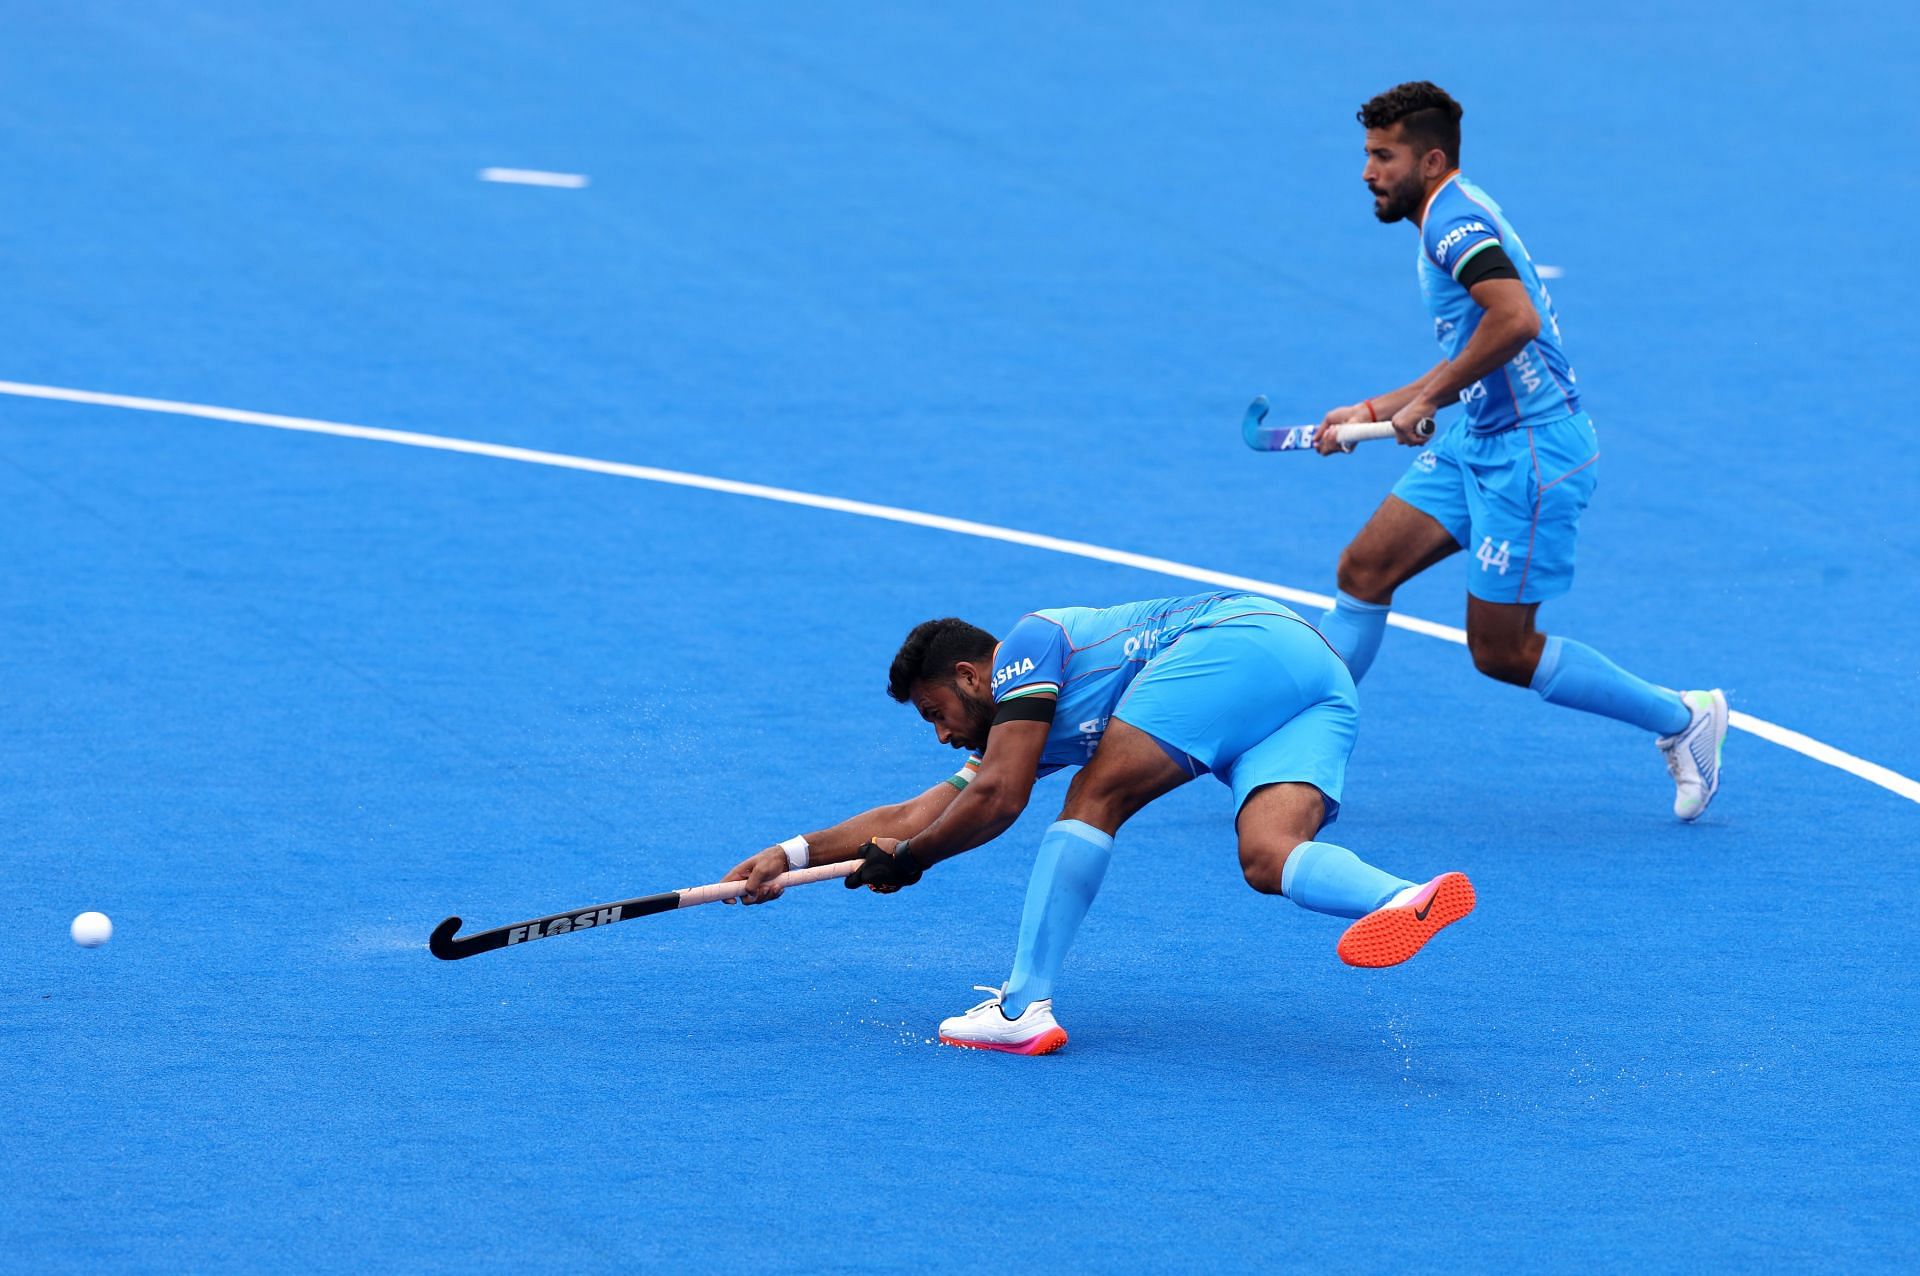 Harmanpreet Singh ended up as the leading goal scorer in the Hockey Pro League